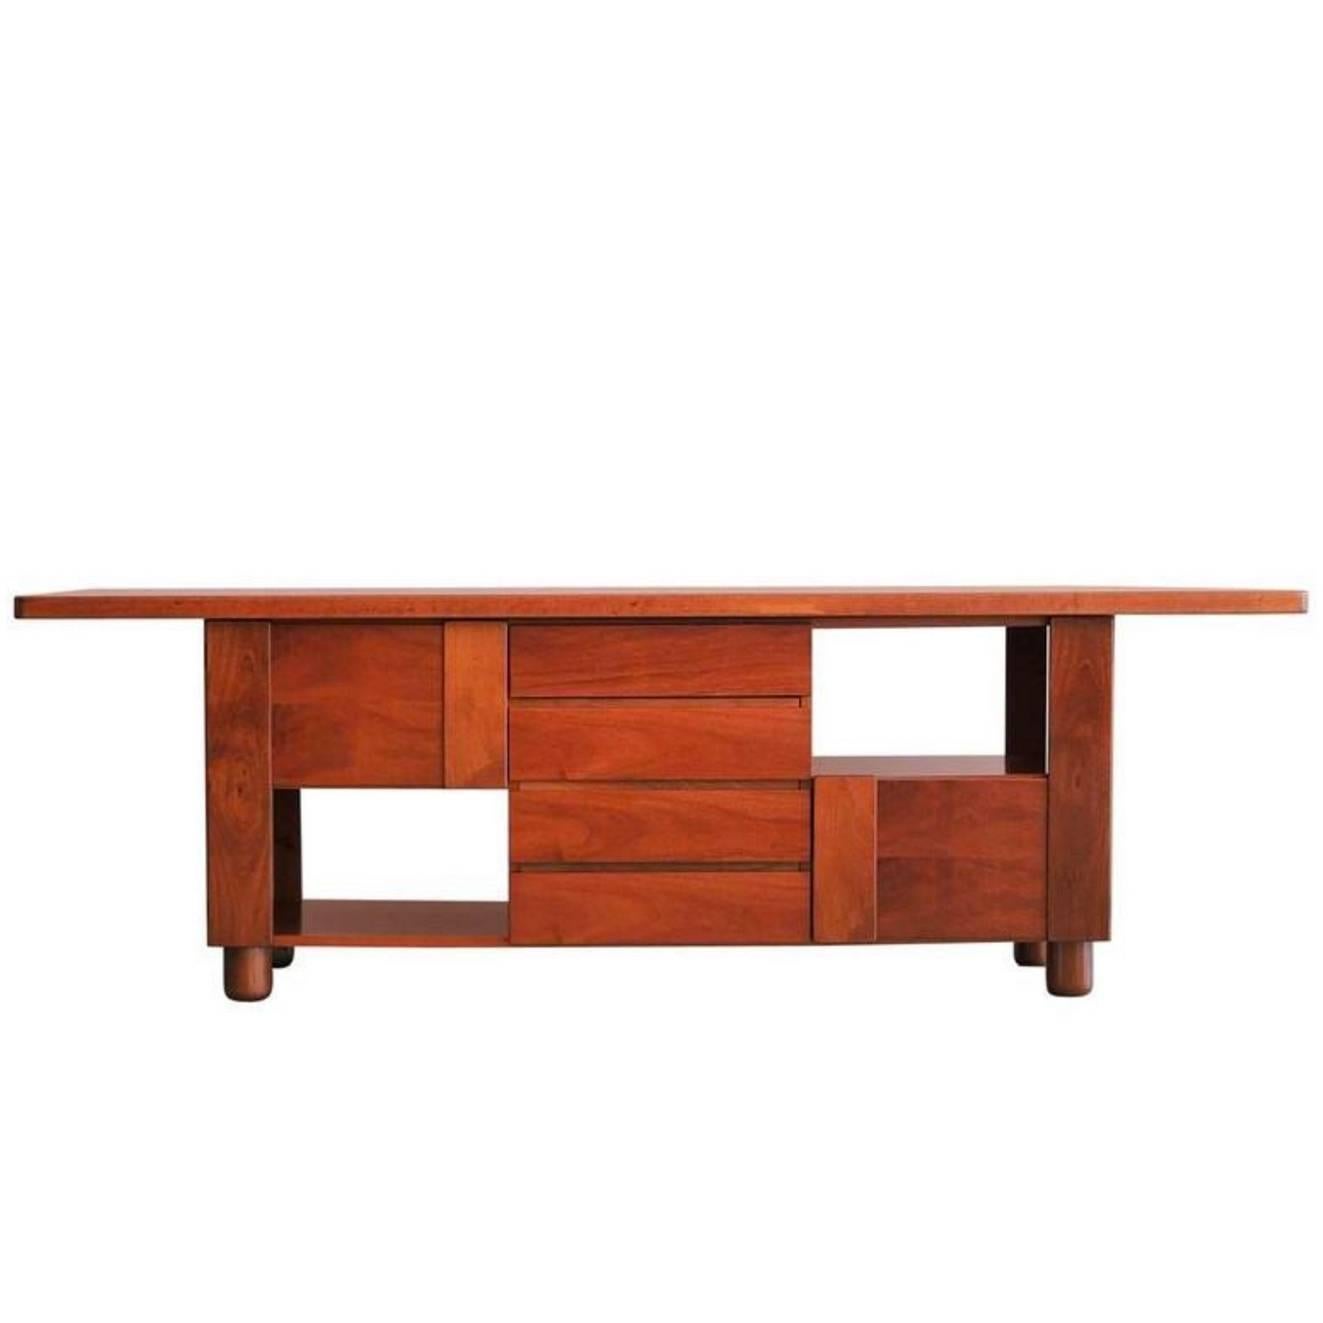 Italian Sideboard in the Style of Giovanni Michelucci